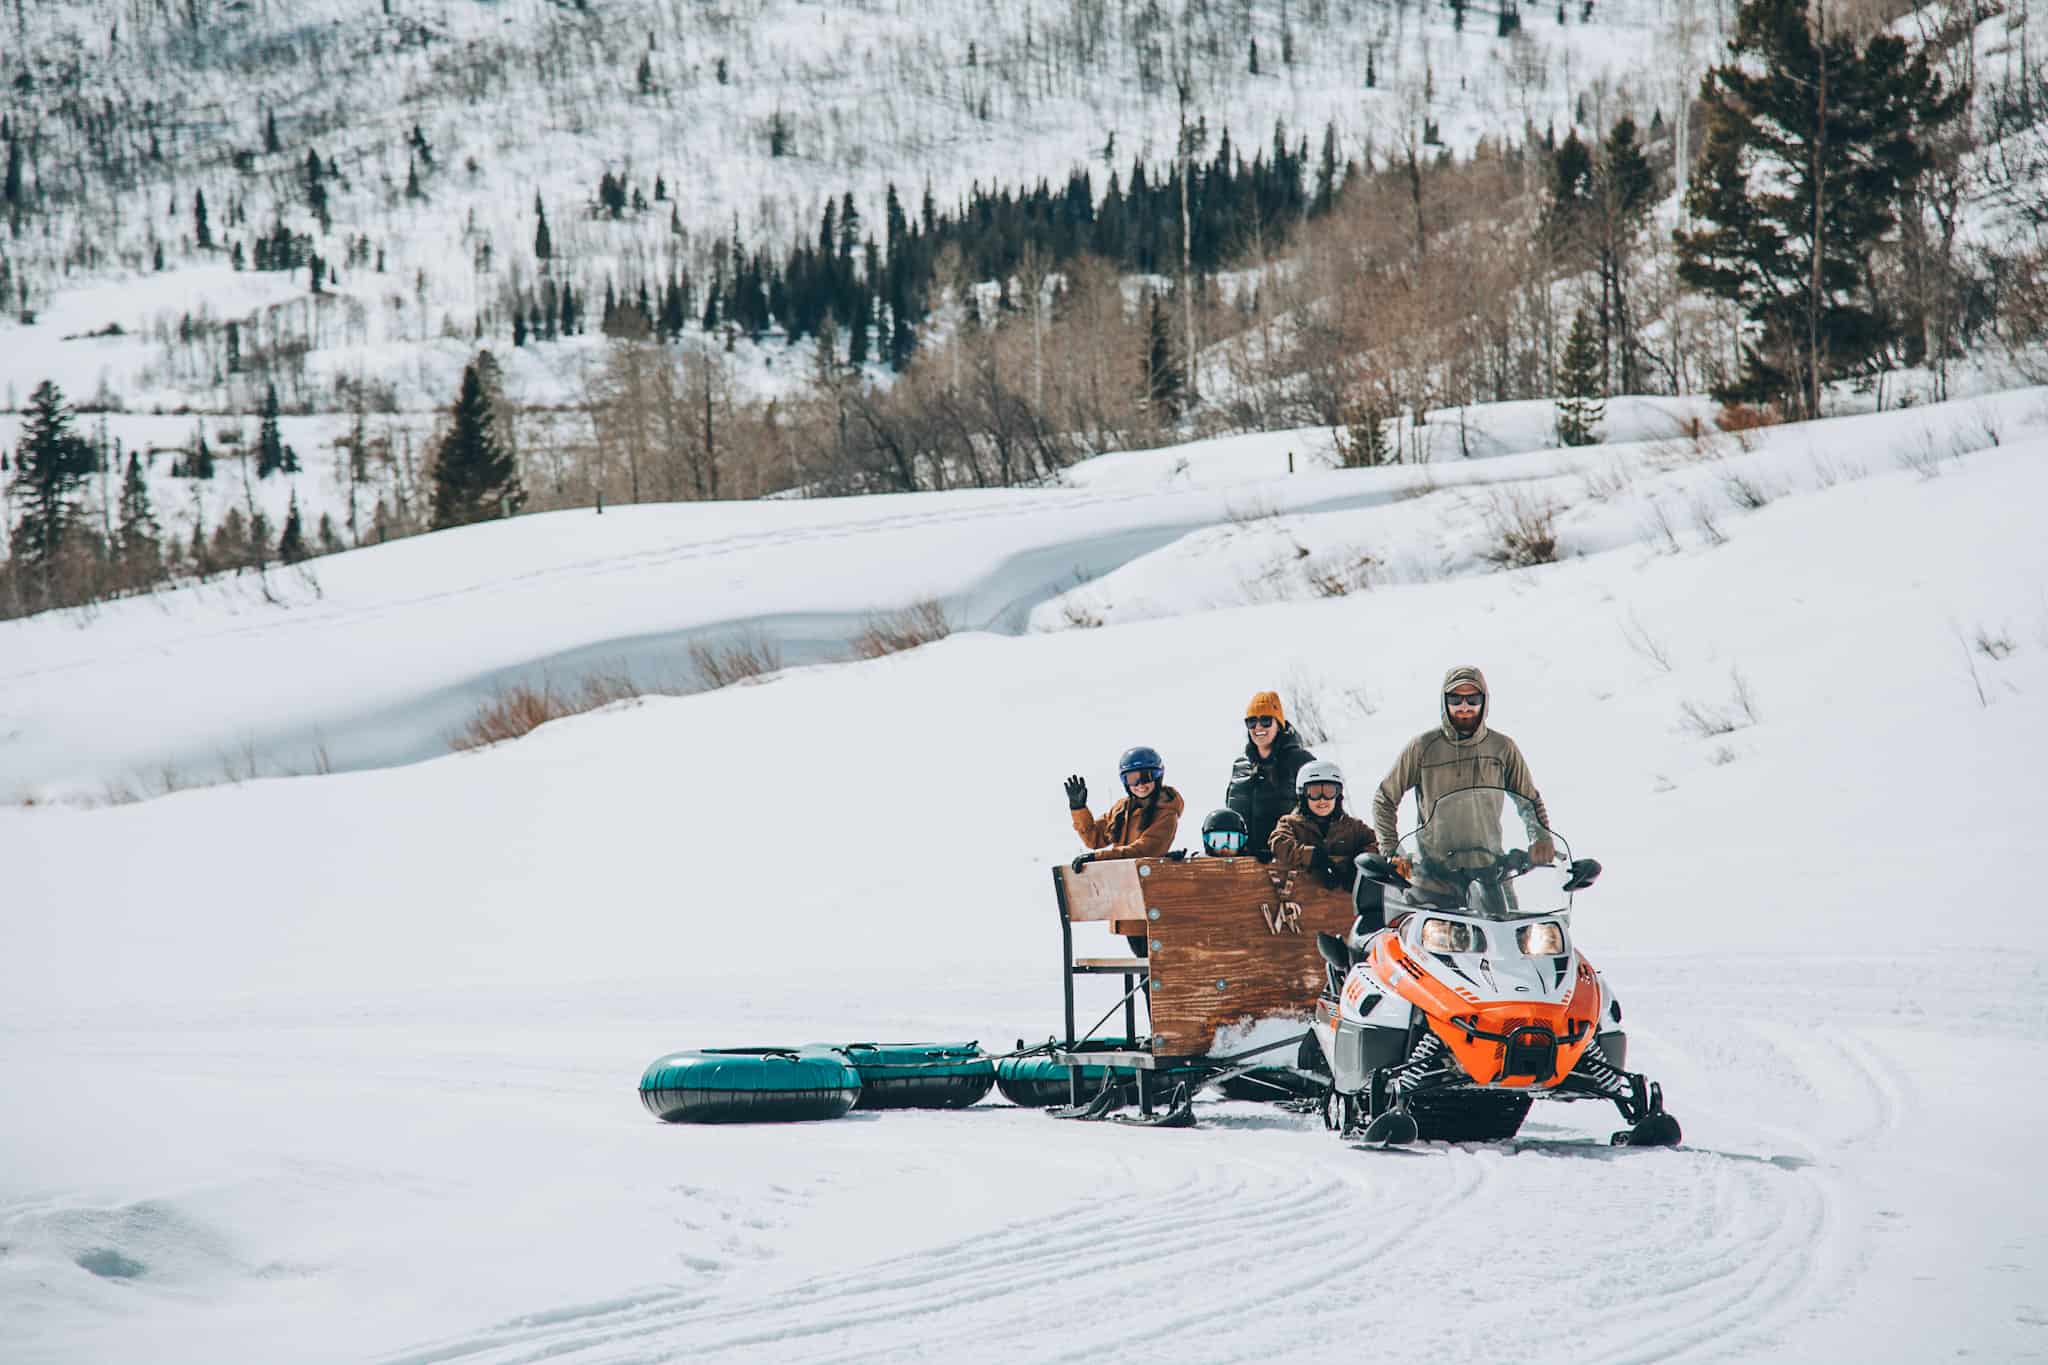 Tubing and snowmobile trips for families - Vista Verde Ranch, Steamboat Colorado